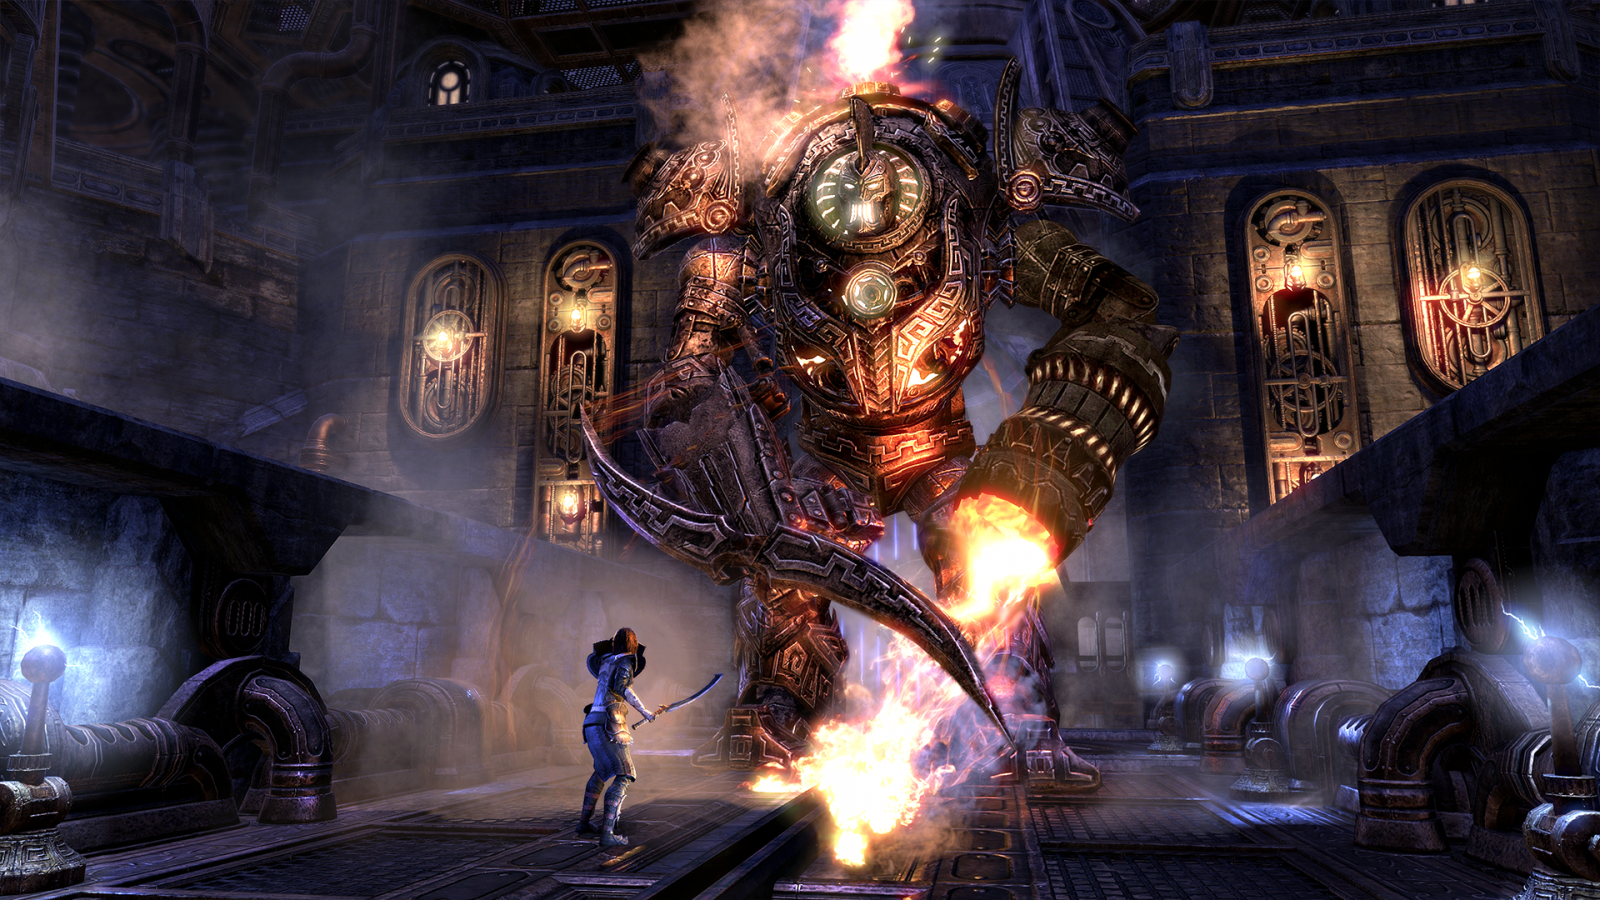 ESO Trial, Halls of Fabrication, Completed!